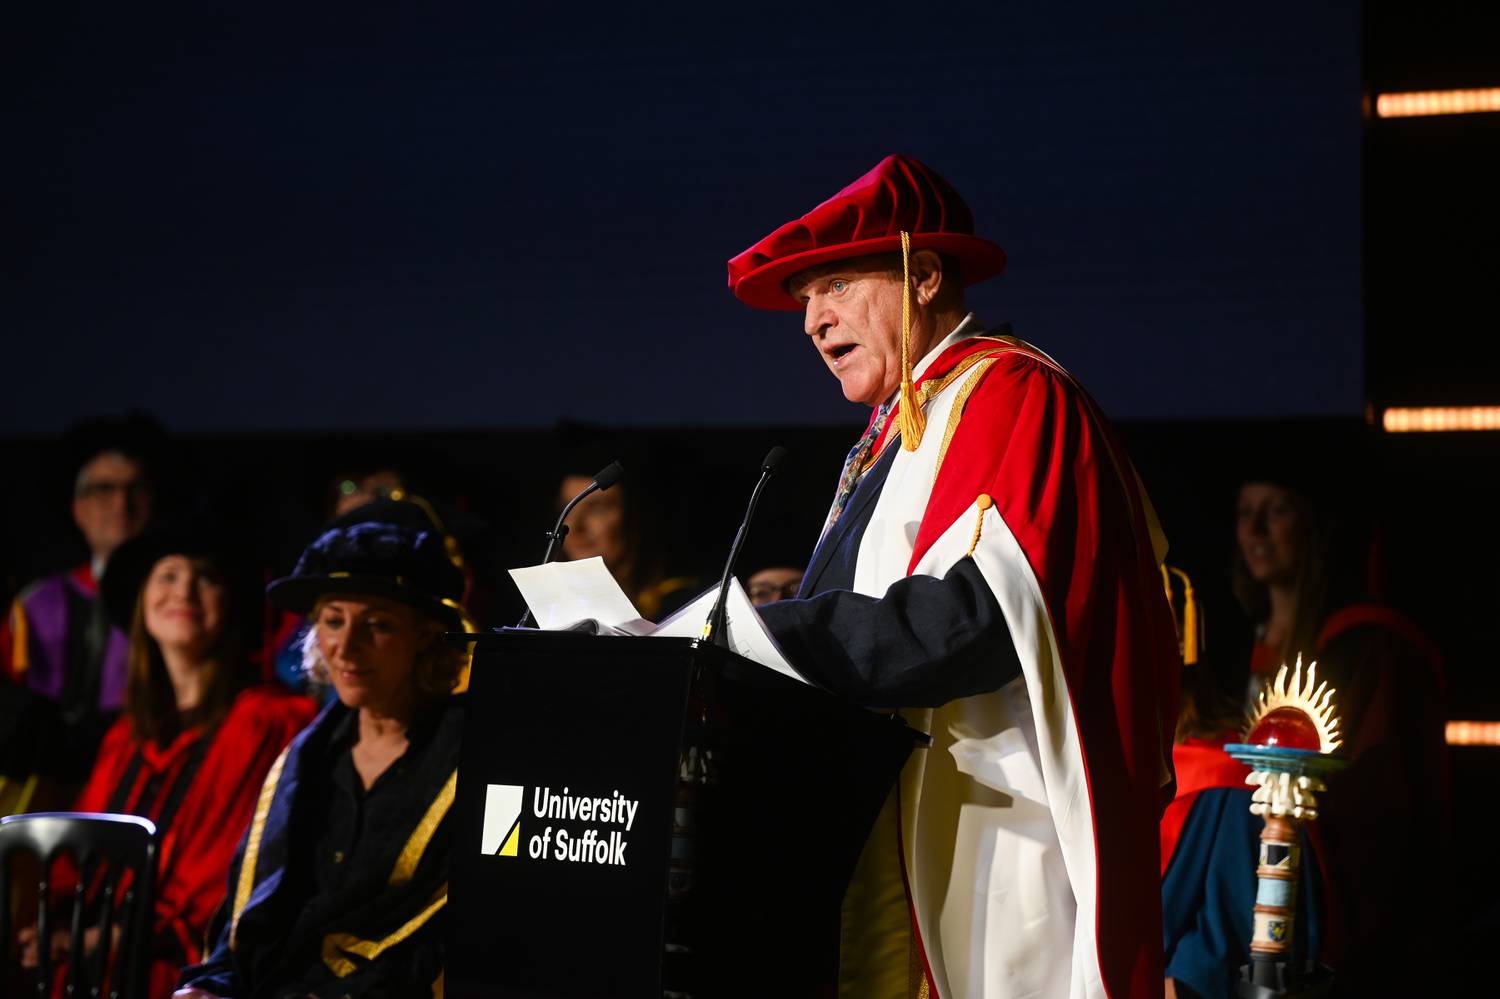 A photo of Charlie Haylock dressed in graduation robes, standing at the lectern delivering his speech